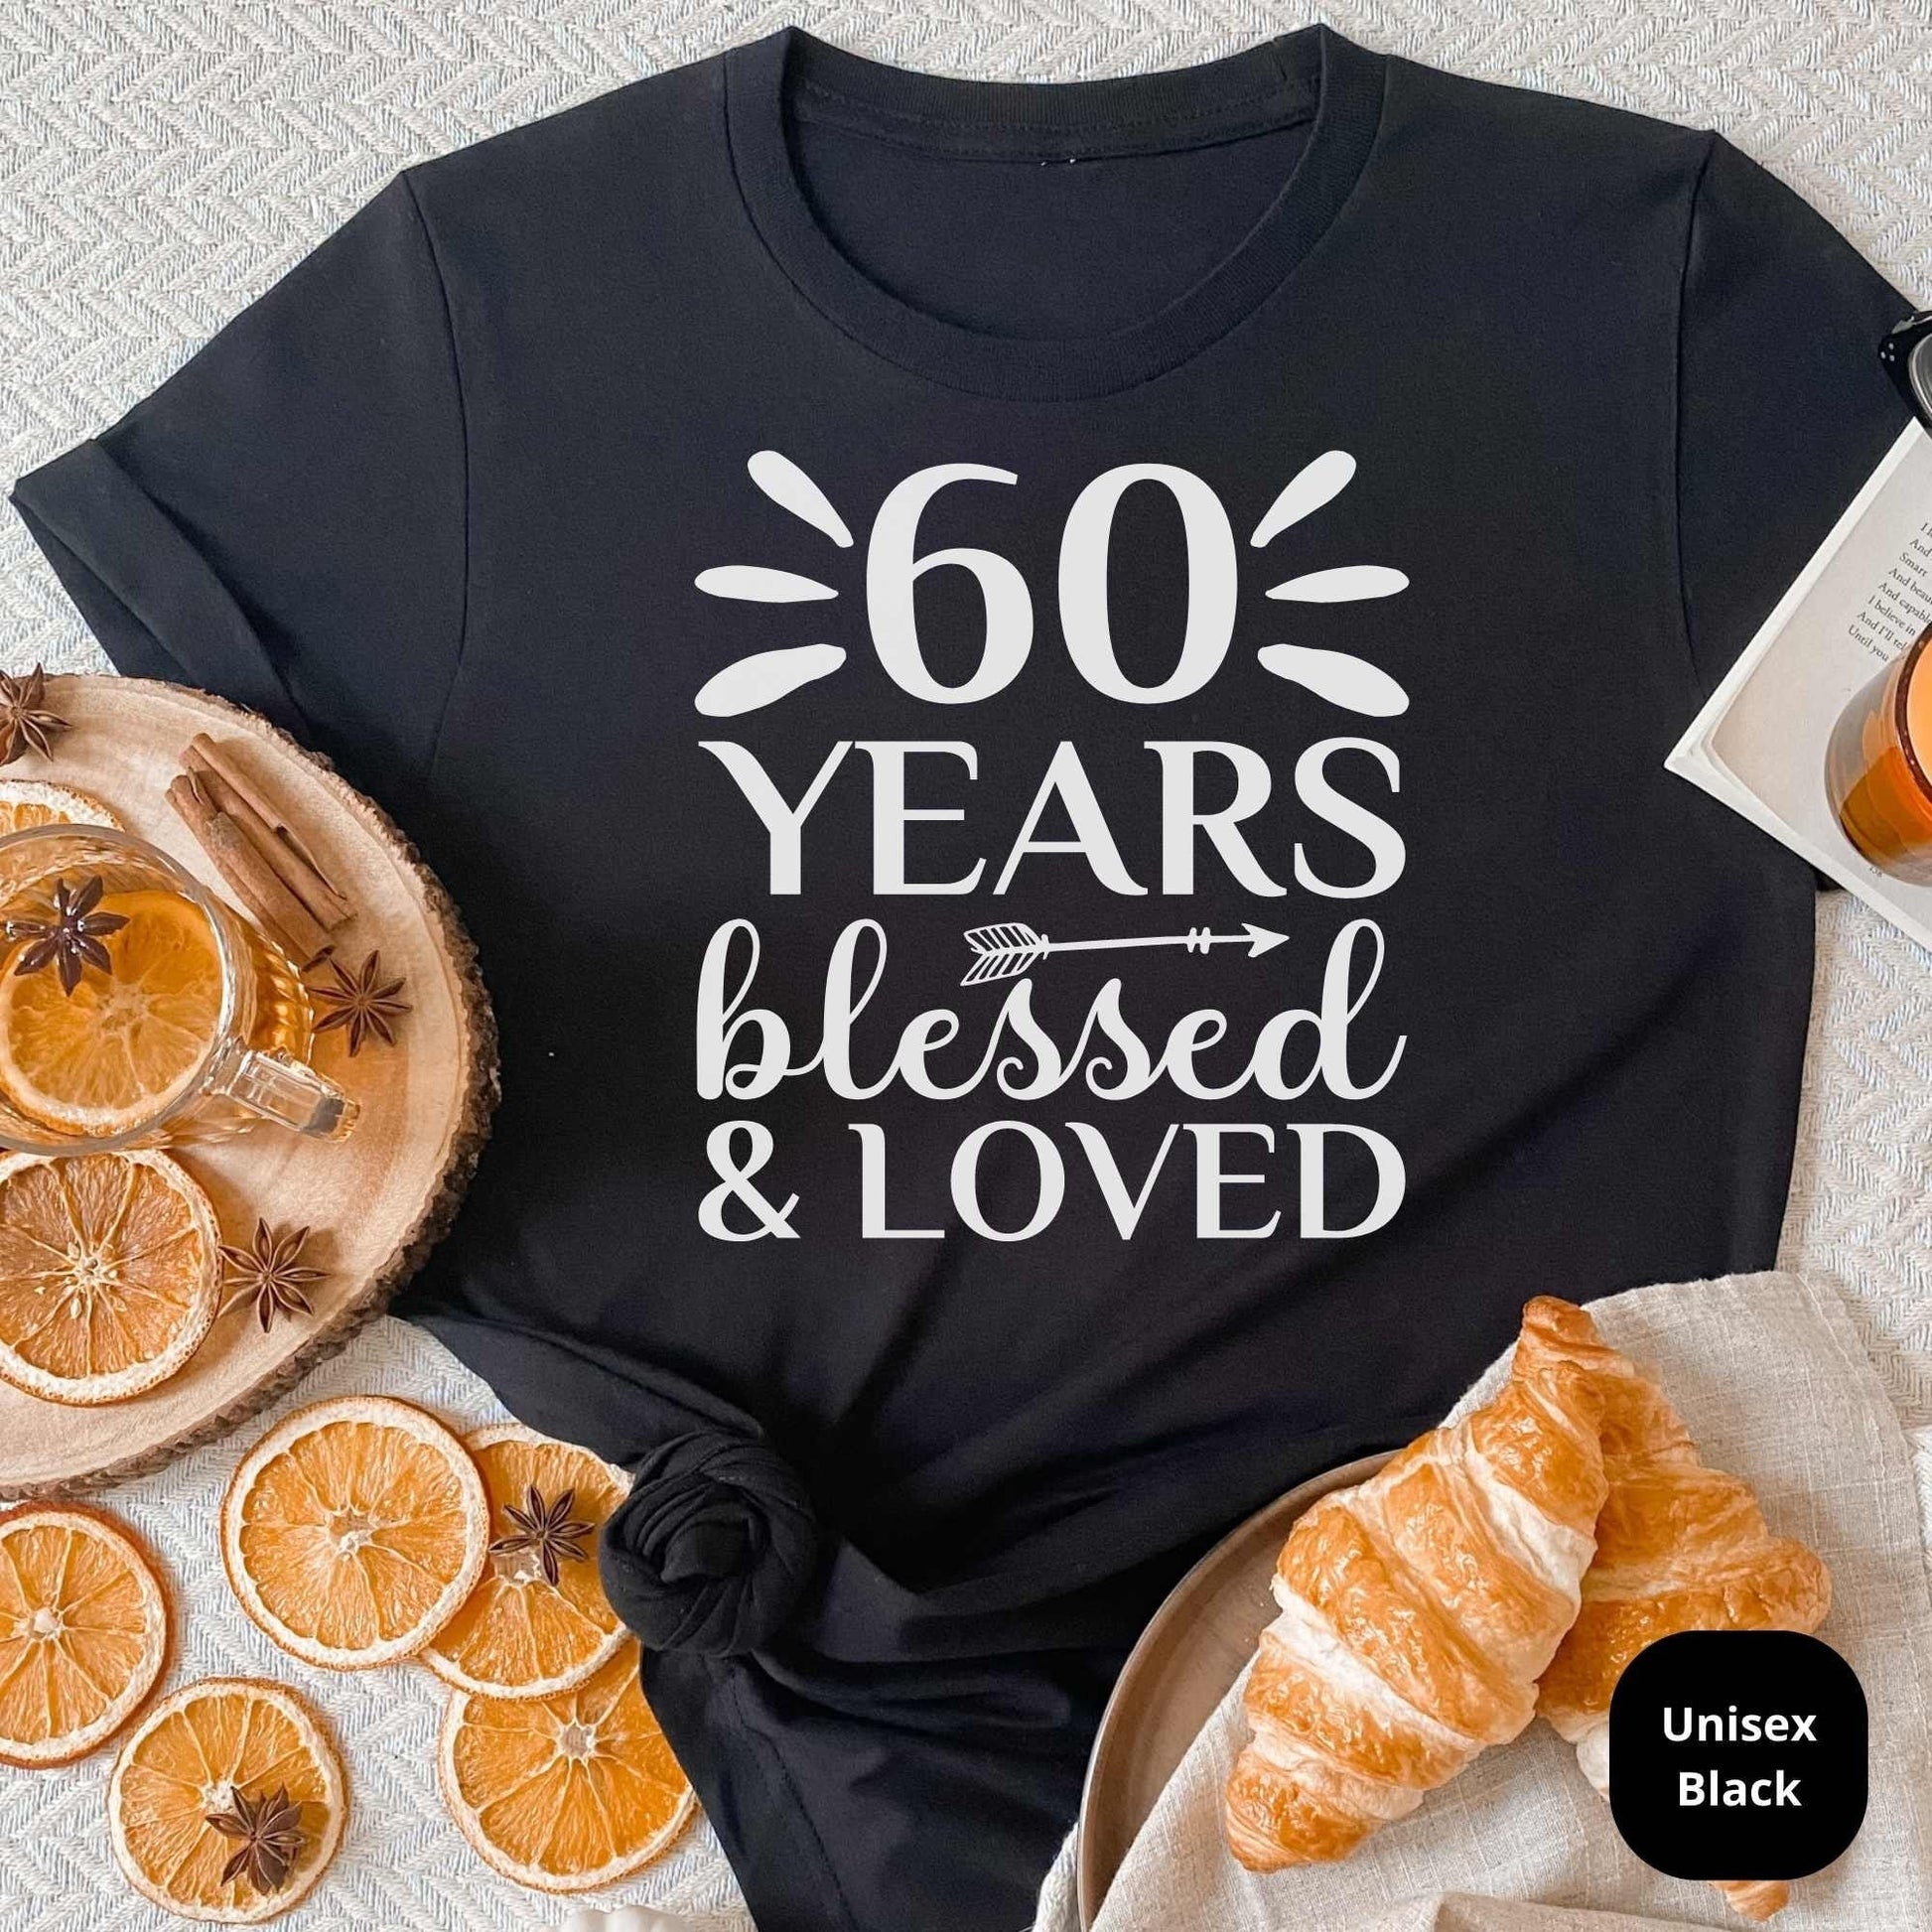 60th Birthday Shirt, 60 Birthday Gift, 60 Years Blessed for Grands, Parents, Aunt, Cousins Bday Party or Wedding Anniversary Celebration HMDesignStudioUS